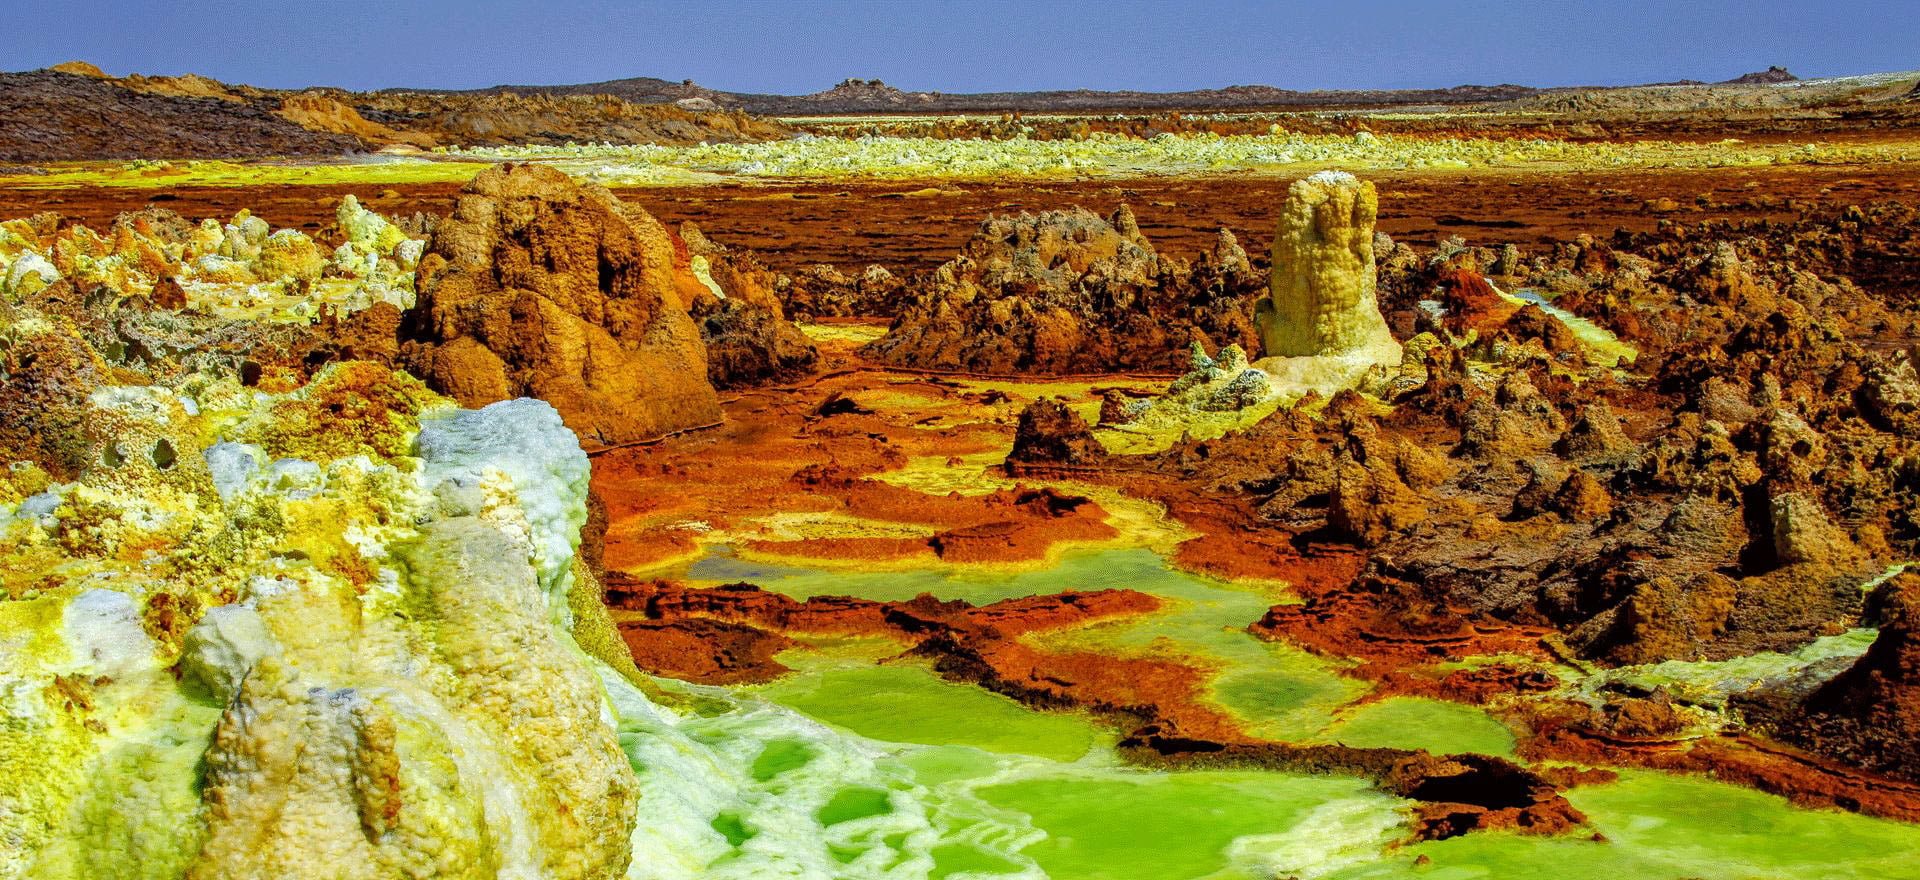 Dallol hot springs - Ethiopia Holidays and Tours